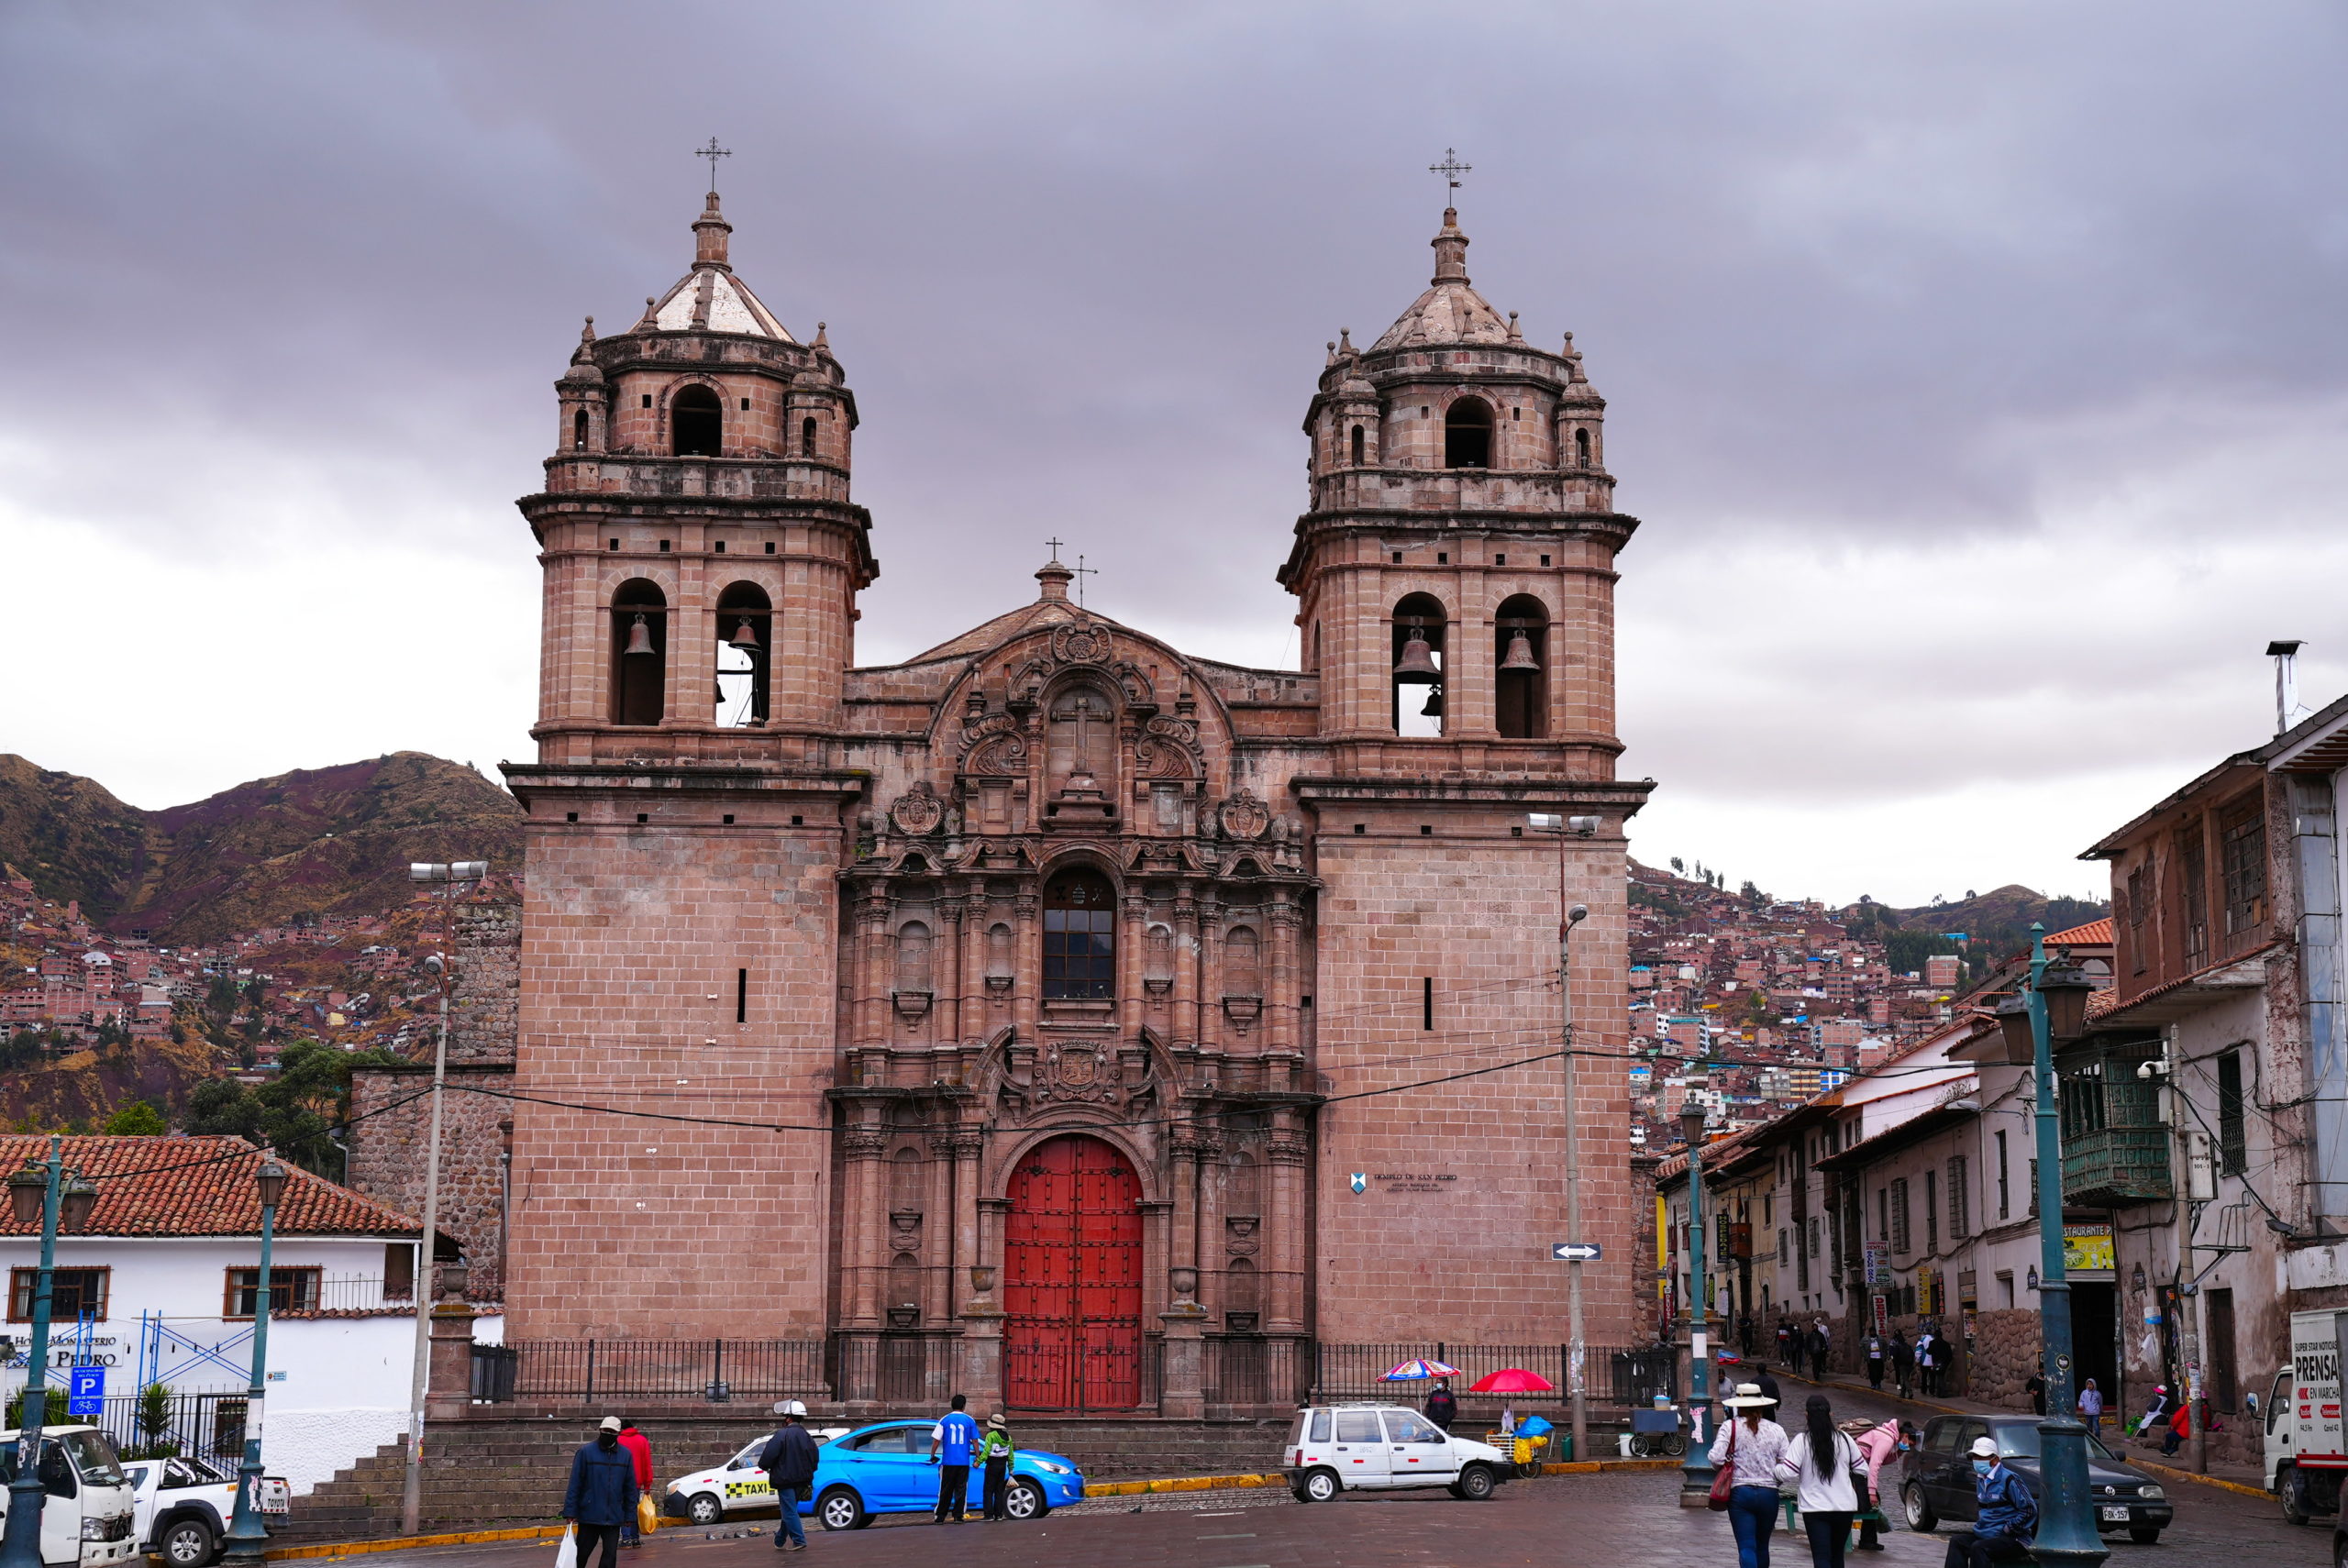 The twin towers of the Templo De San Pedro.